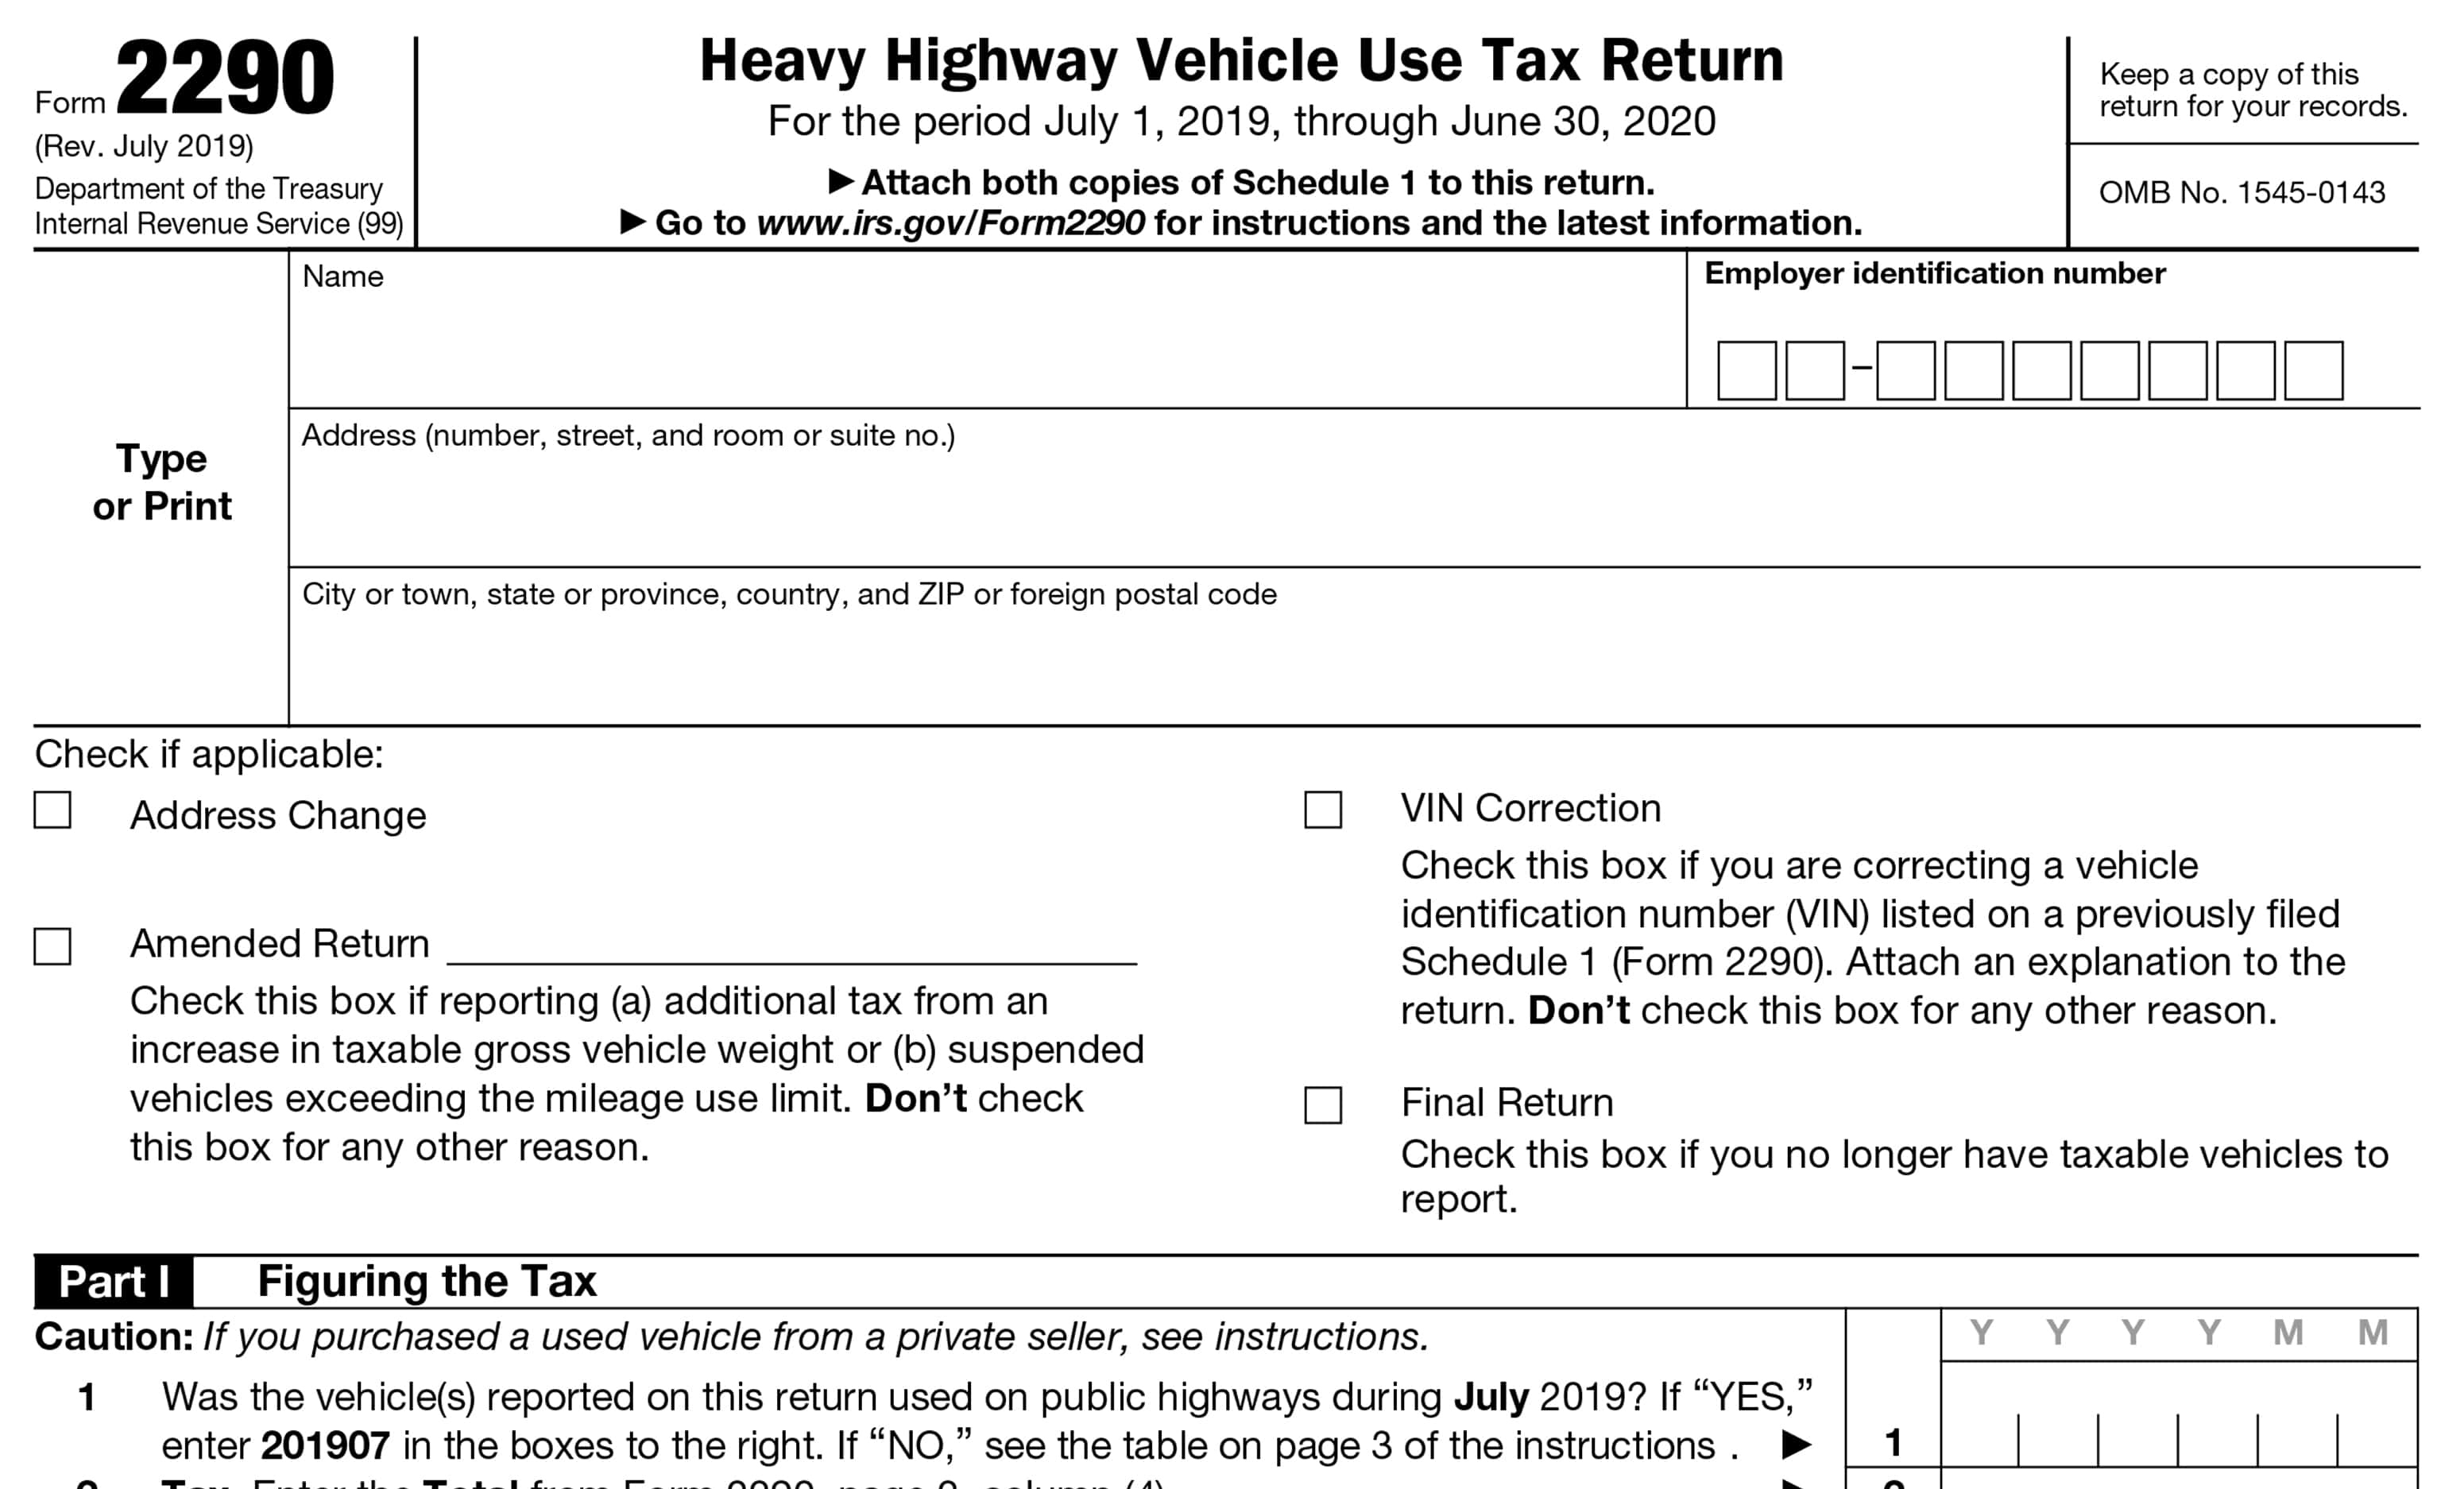 irs-form-2290-instructions-how-to-fill-hvut-2290-form